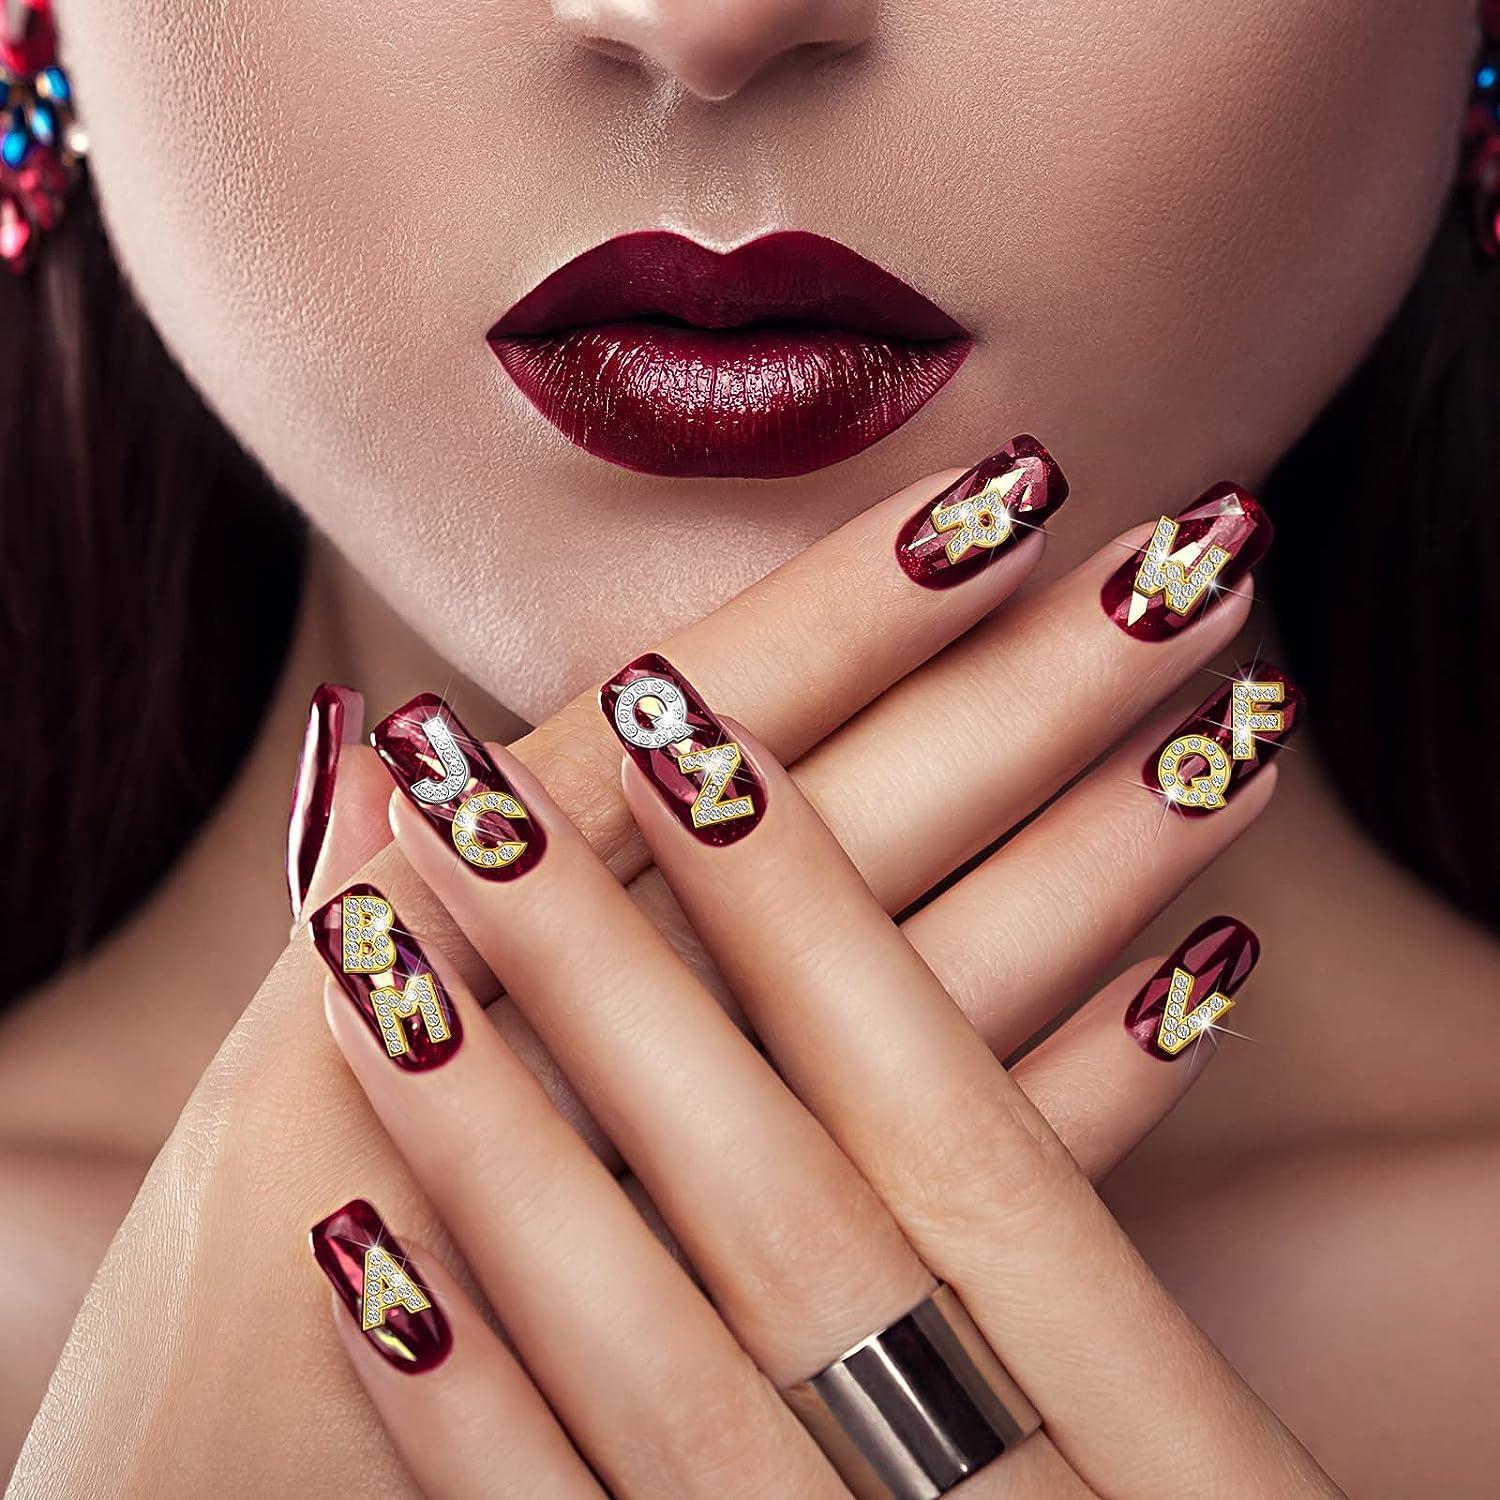 Get the Best Nail Charms for Salons and Press Nail